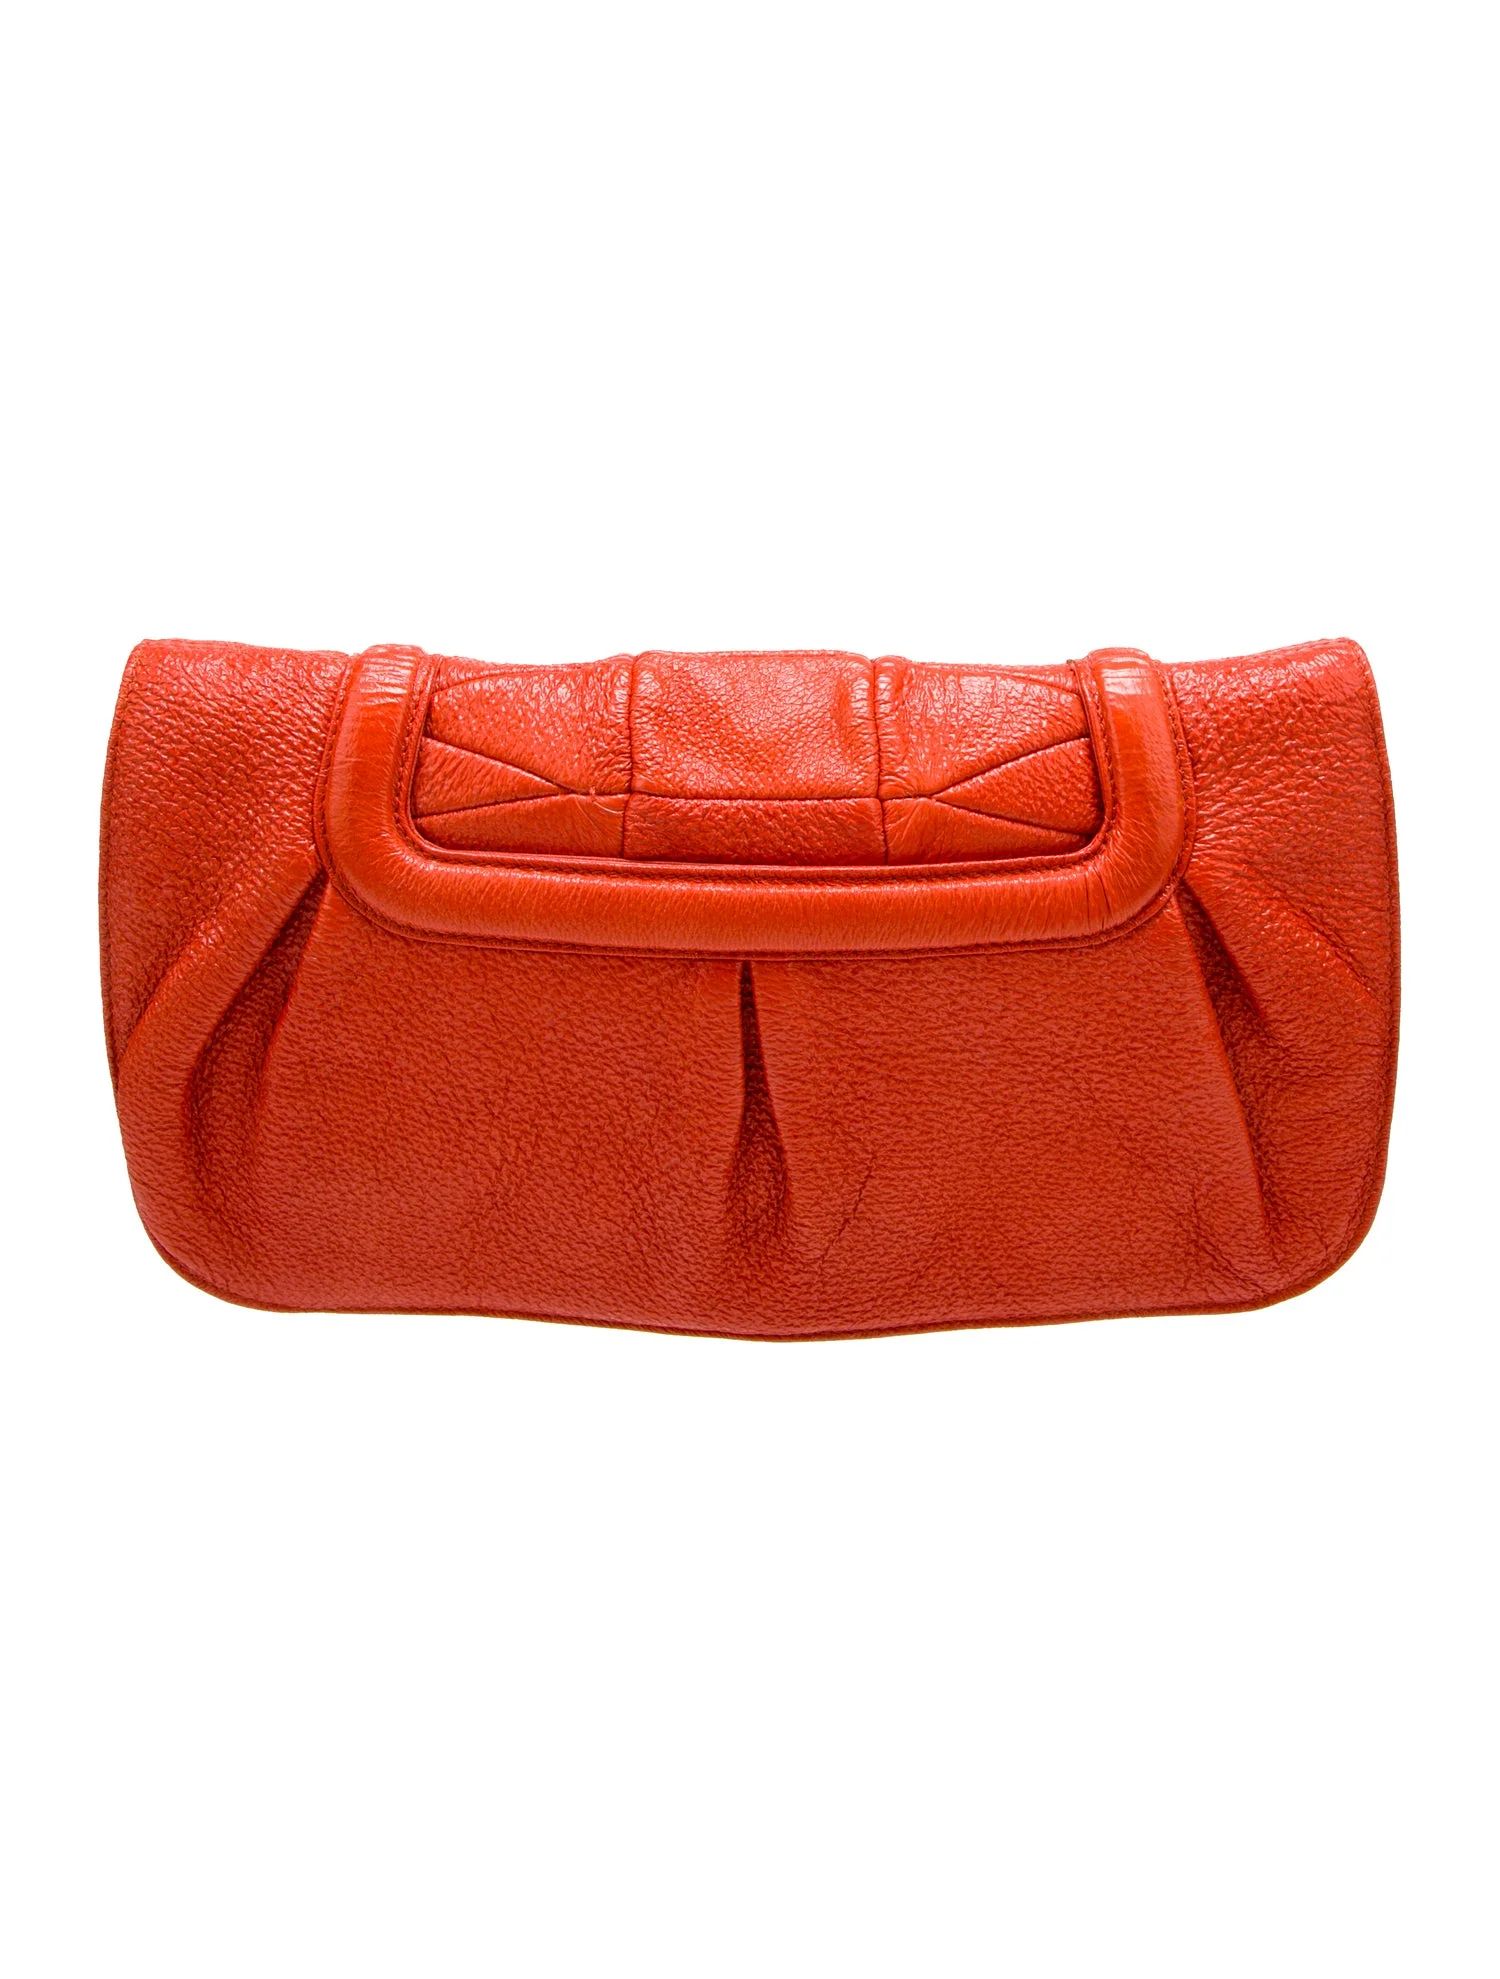 Leather Flap Clutch | The RealReal